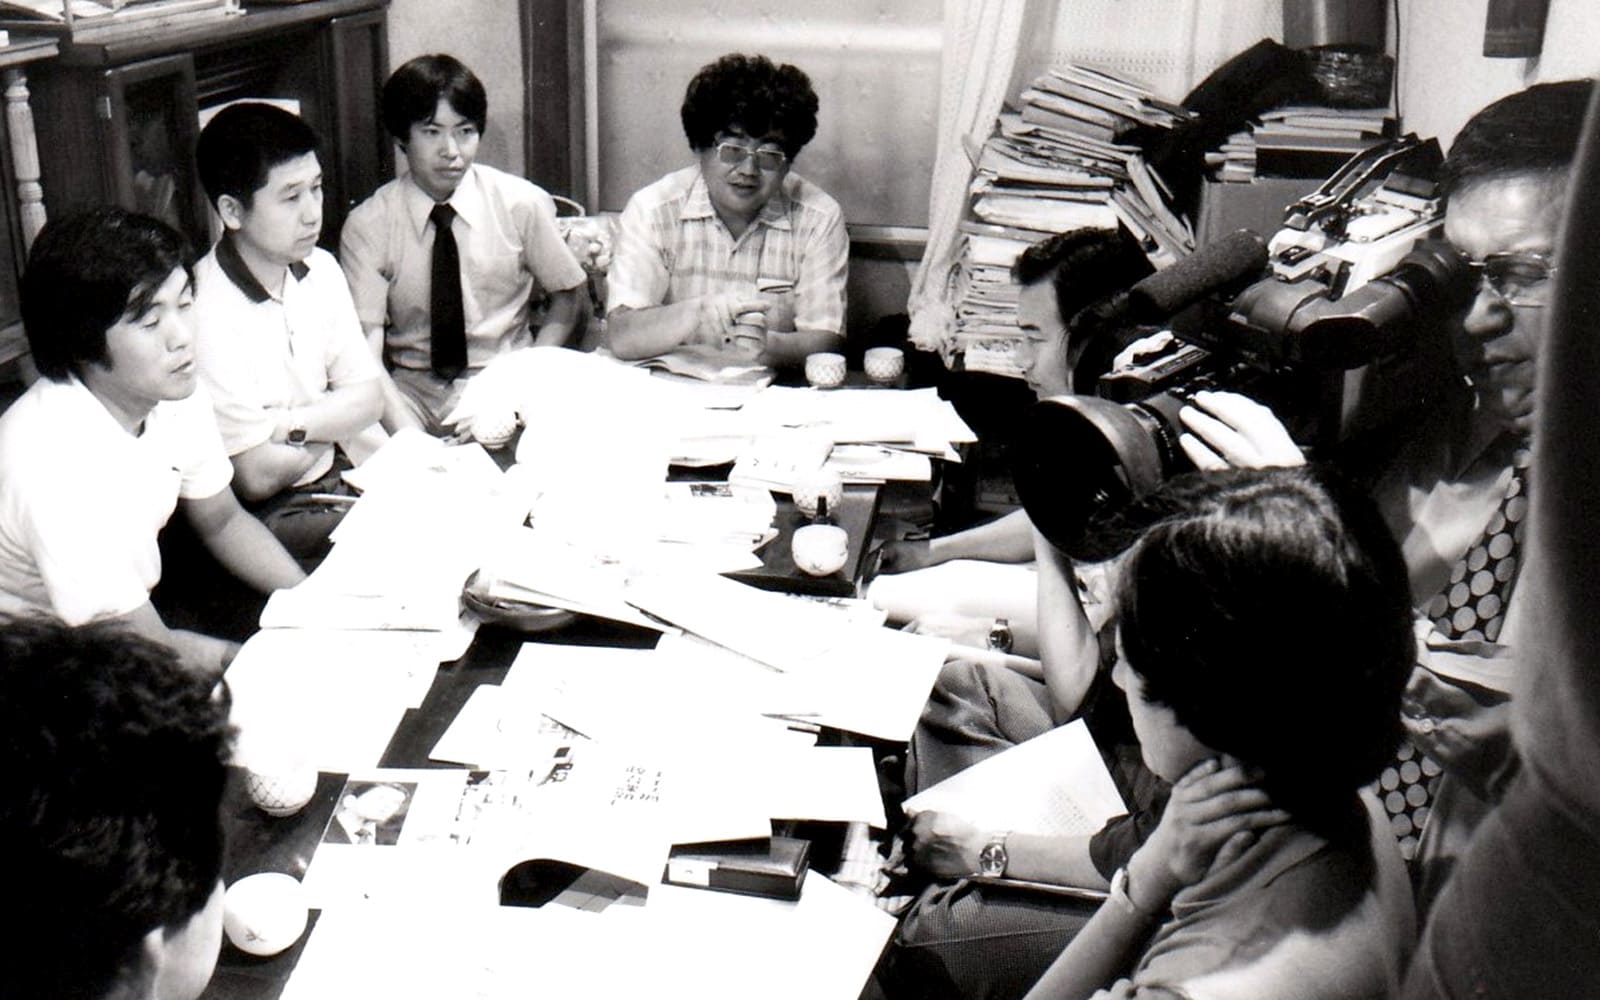 In 1984, the new educational movement established by Mukoyama received significant coverage on TV and in newspapers.
(Keihin Educational Circle 1987)